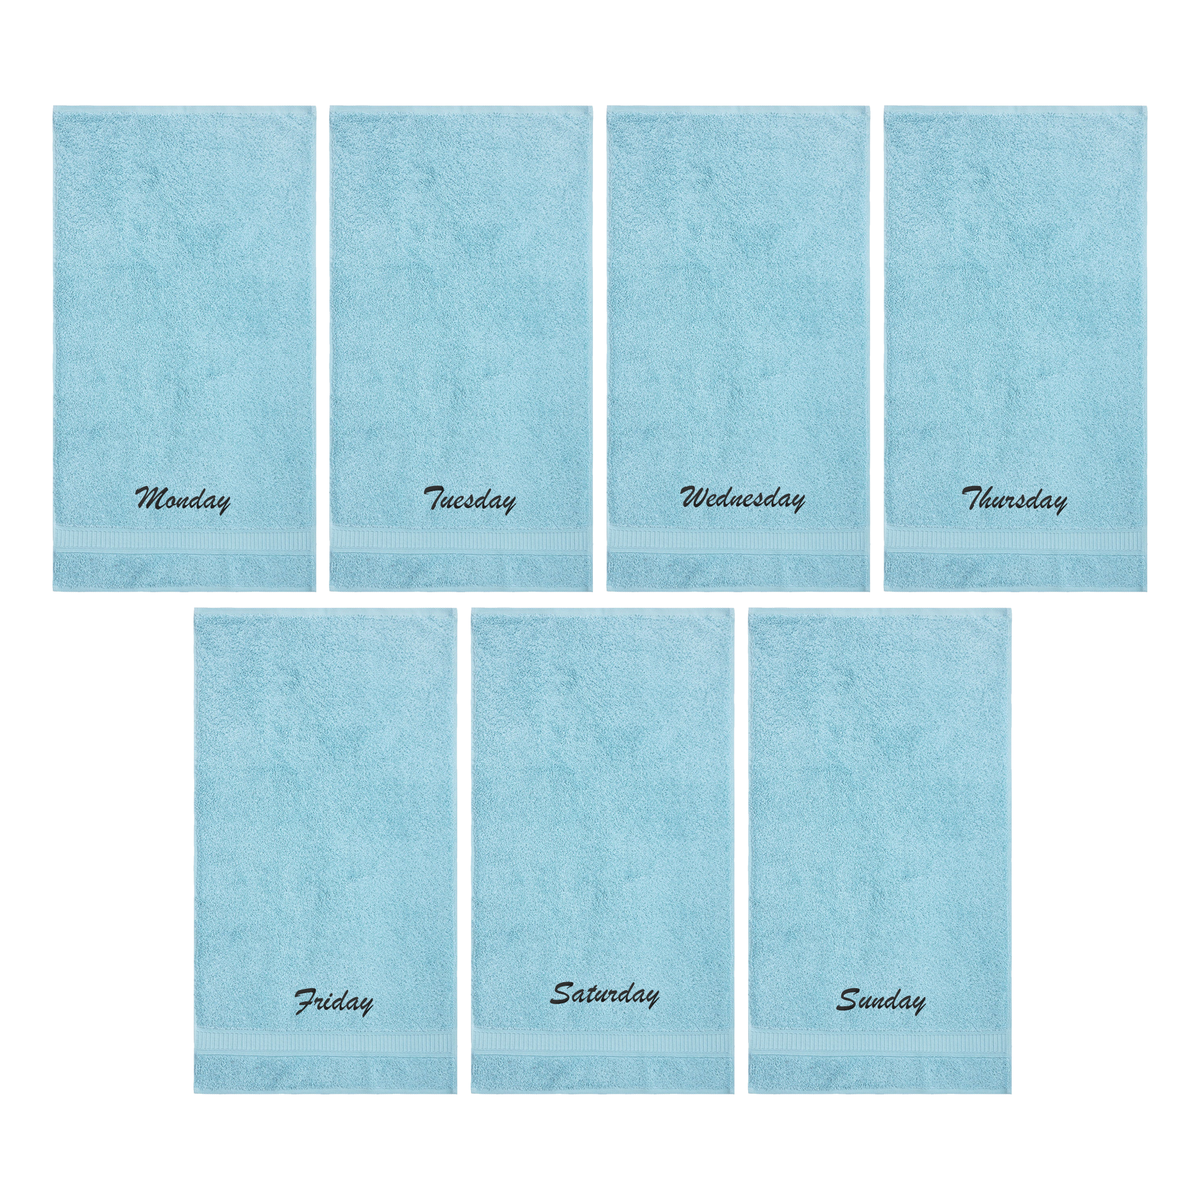 Customized Seven Days Towels - Washcloths and Hand Towels - Set of 7